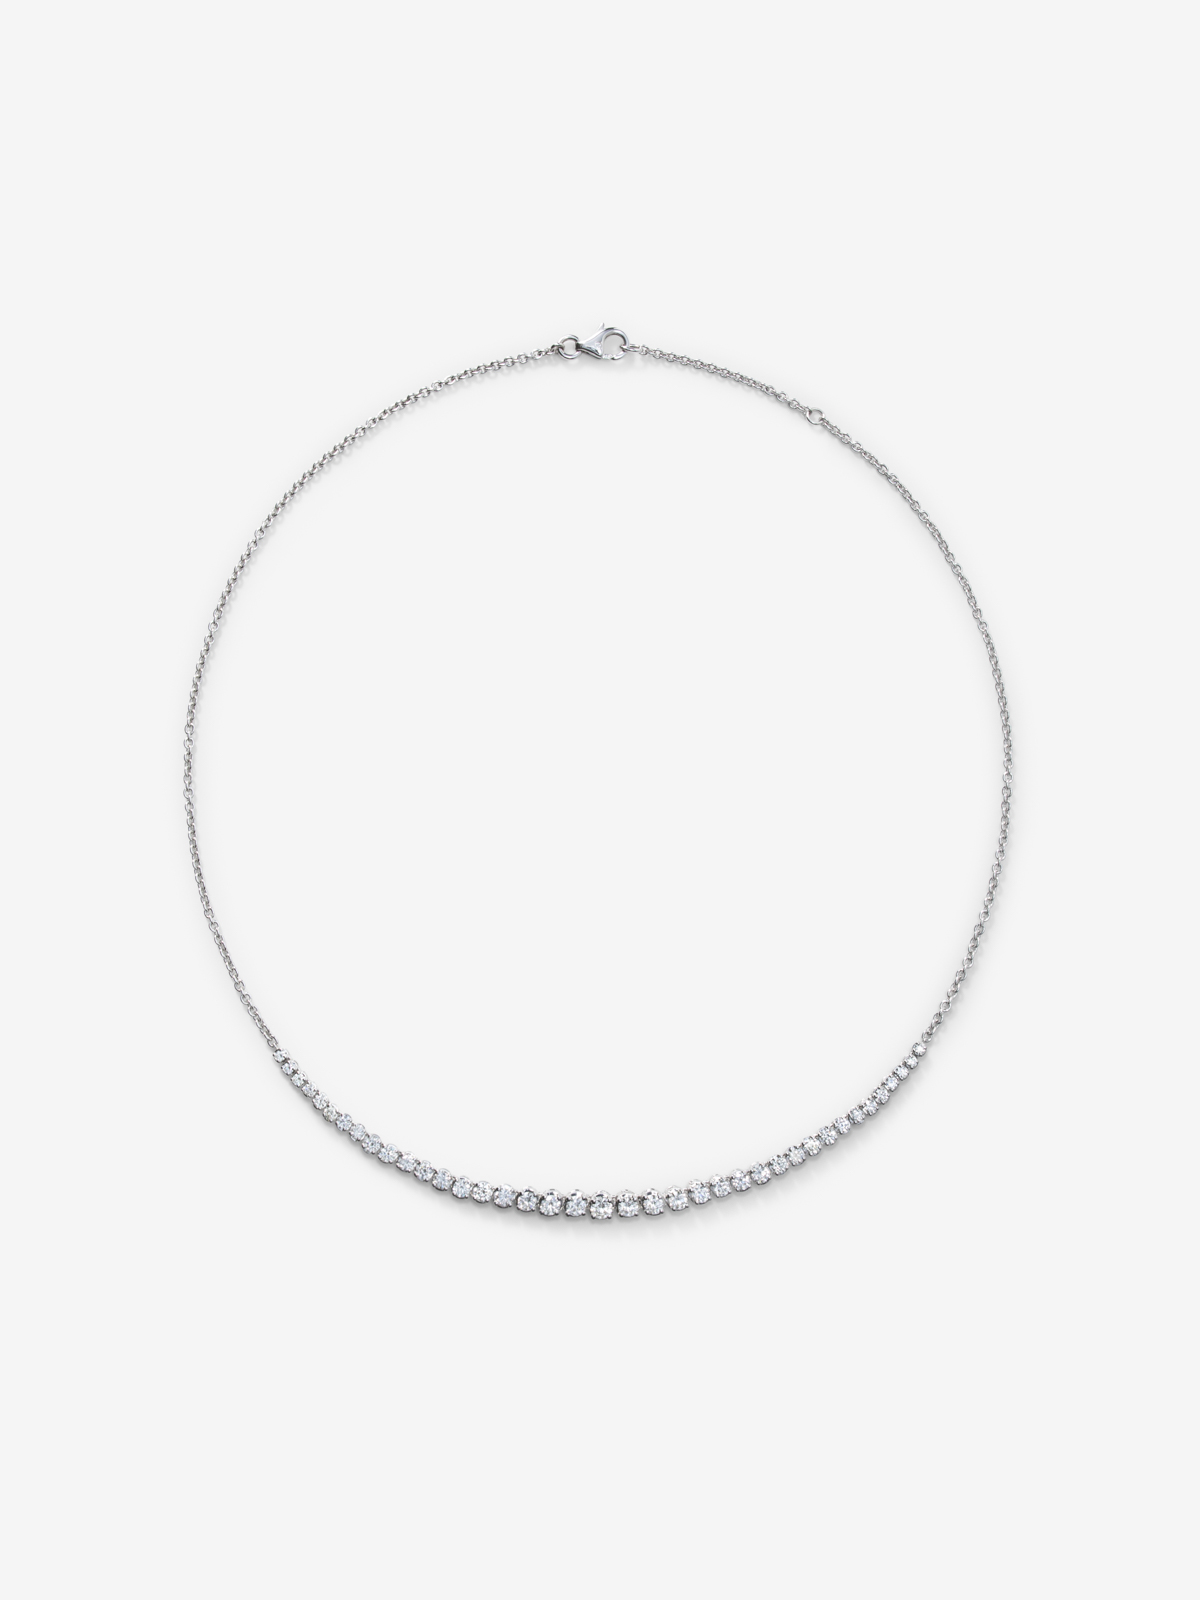 18k white gold necklace with 1.93cts diamonds